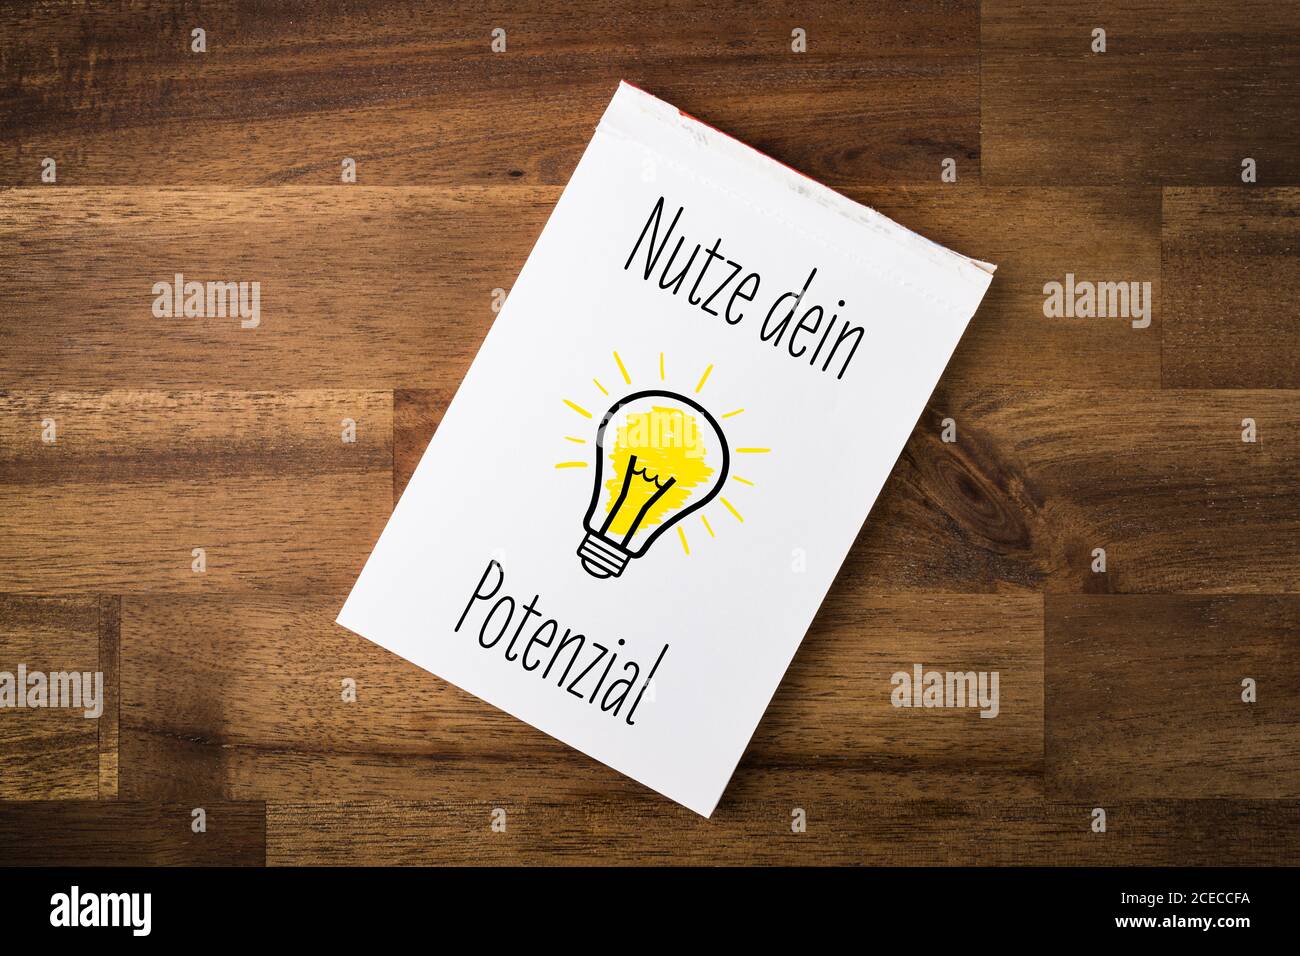 Nutze dein Potenzial - German Text - Translation: use your potential - light bulb and text on a notepad Stock Photo